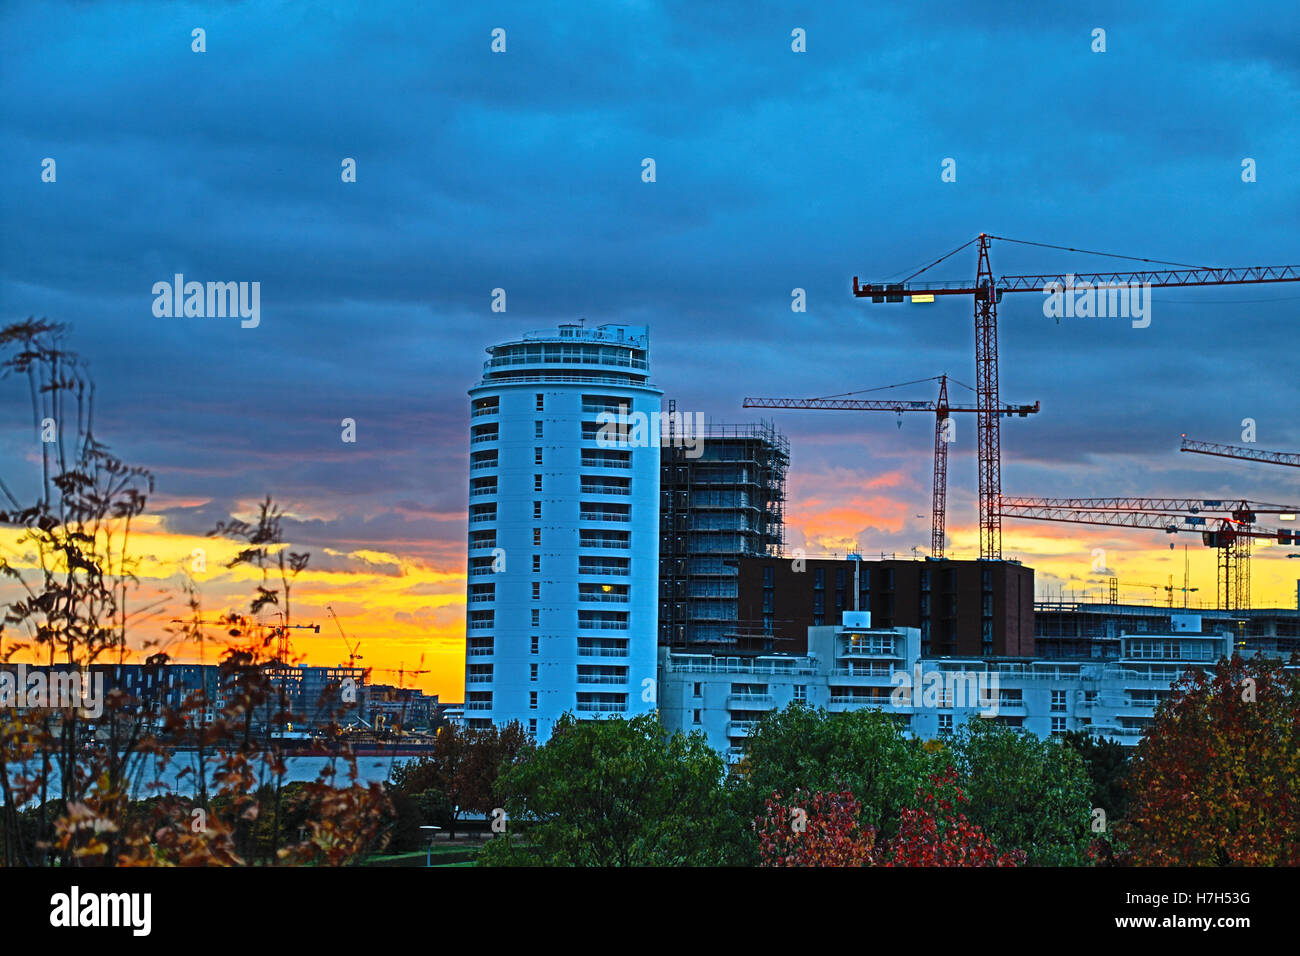 Thames Barrier Park, Silvertown, London, UK. 5th Nov, 2016. UK Weather: Colourful Autumn sunset over Thames Barrier Park in London Docklands. Extensive Building work in Royal Wharf development continues with multiple cranes Credit:  WansfordPhoto/Alamy Live News Stock Photo